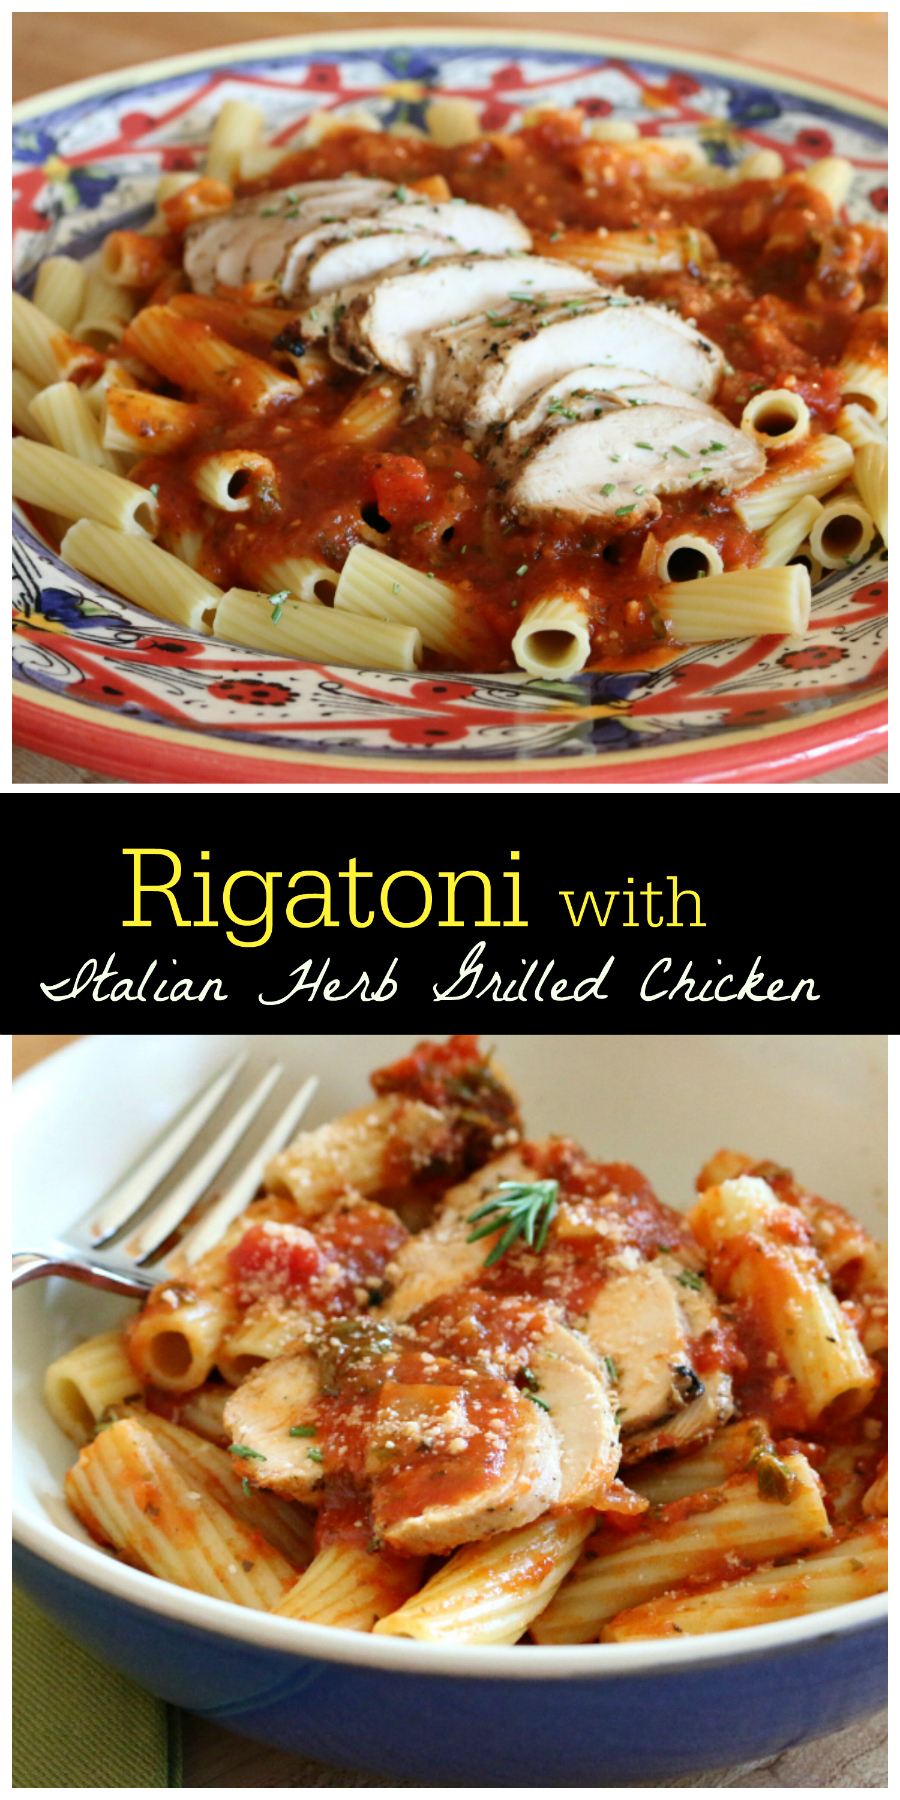 Rigatoni with Italian Herb Grilled Chicken | CeceliasGoodStuff.com | Good Food for Good People